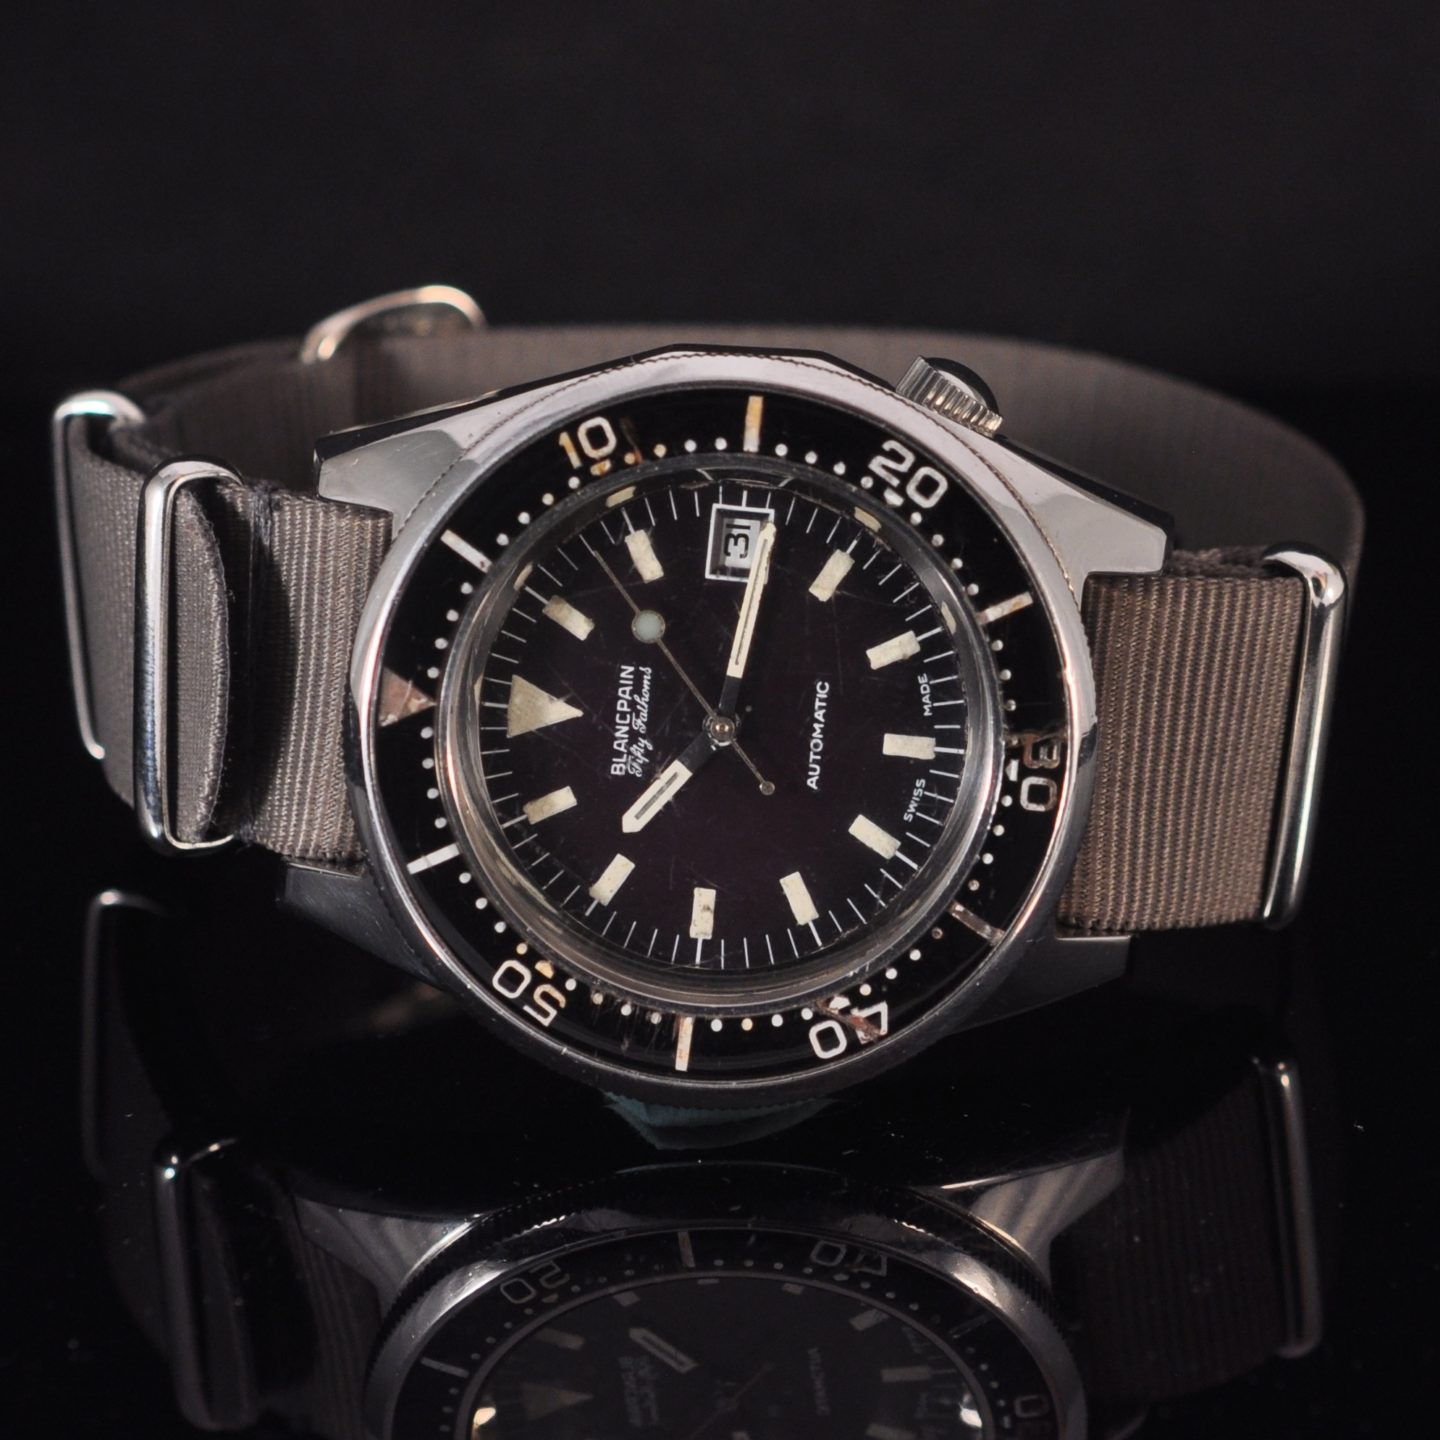 Blancpain Fifty Fathoms - Stainless steel, Good condition